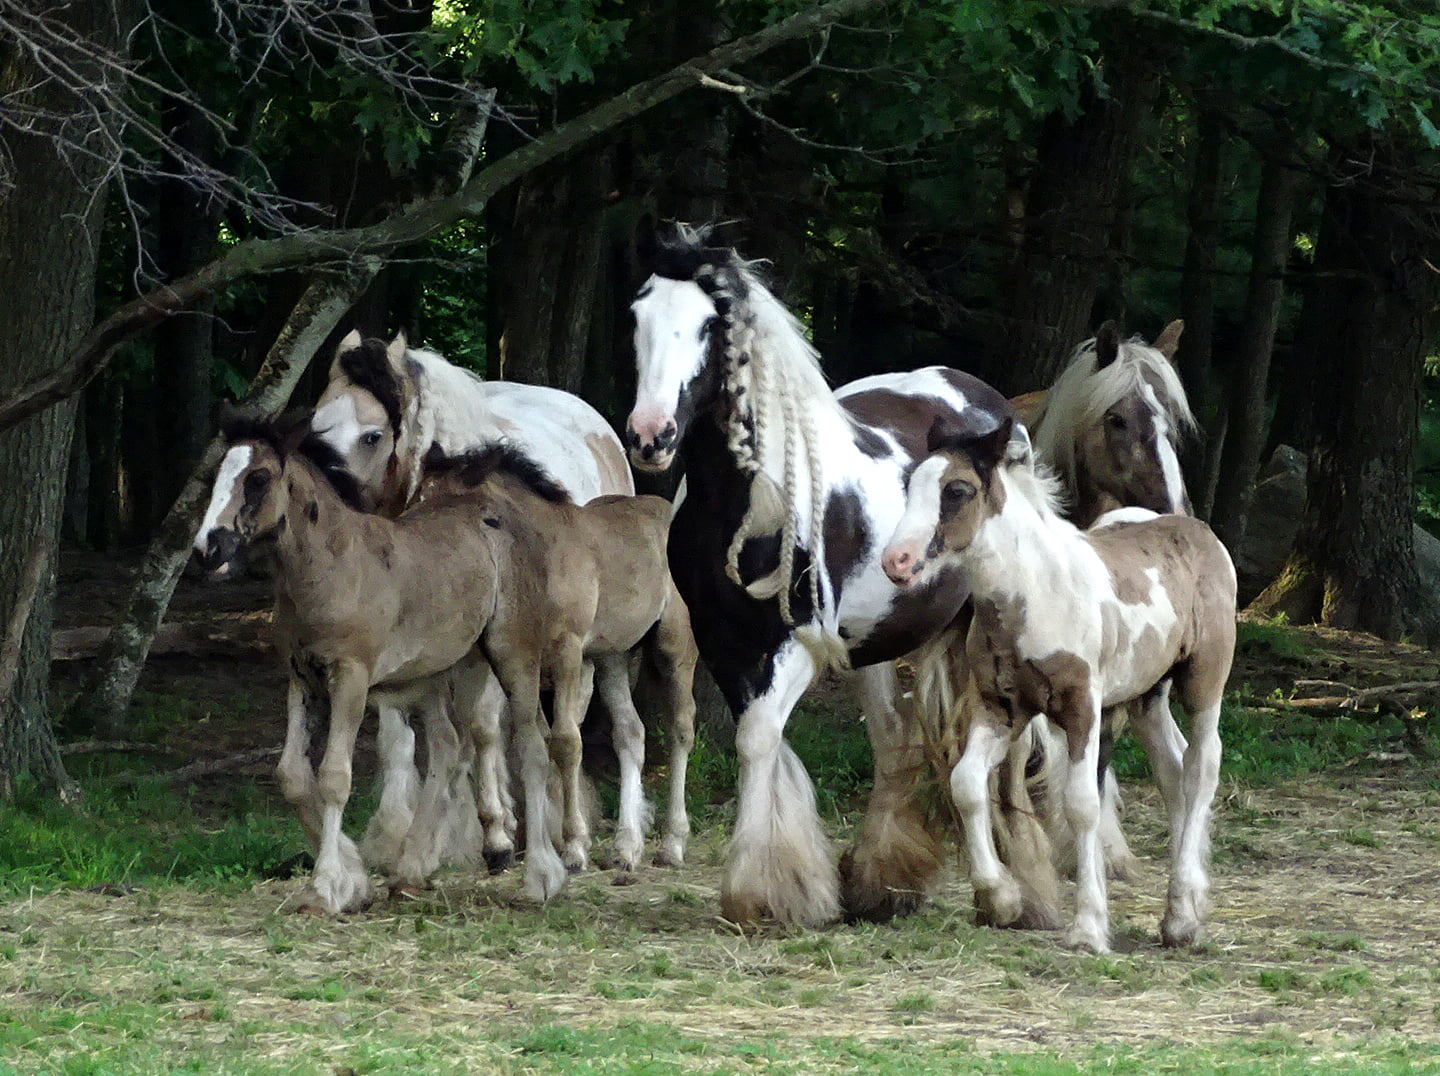 Gypsy mares and foals @Feathered Gold Stables